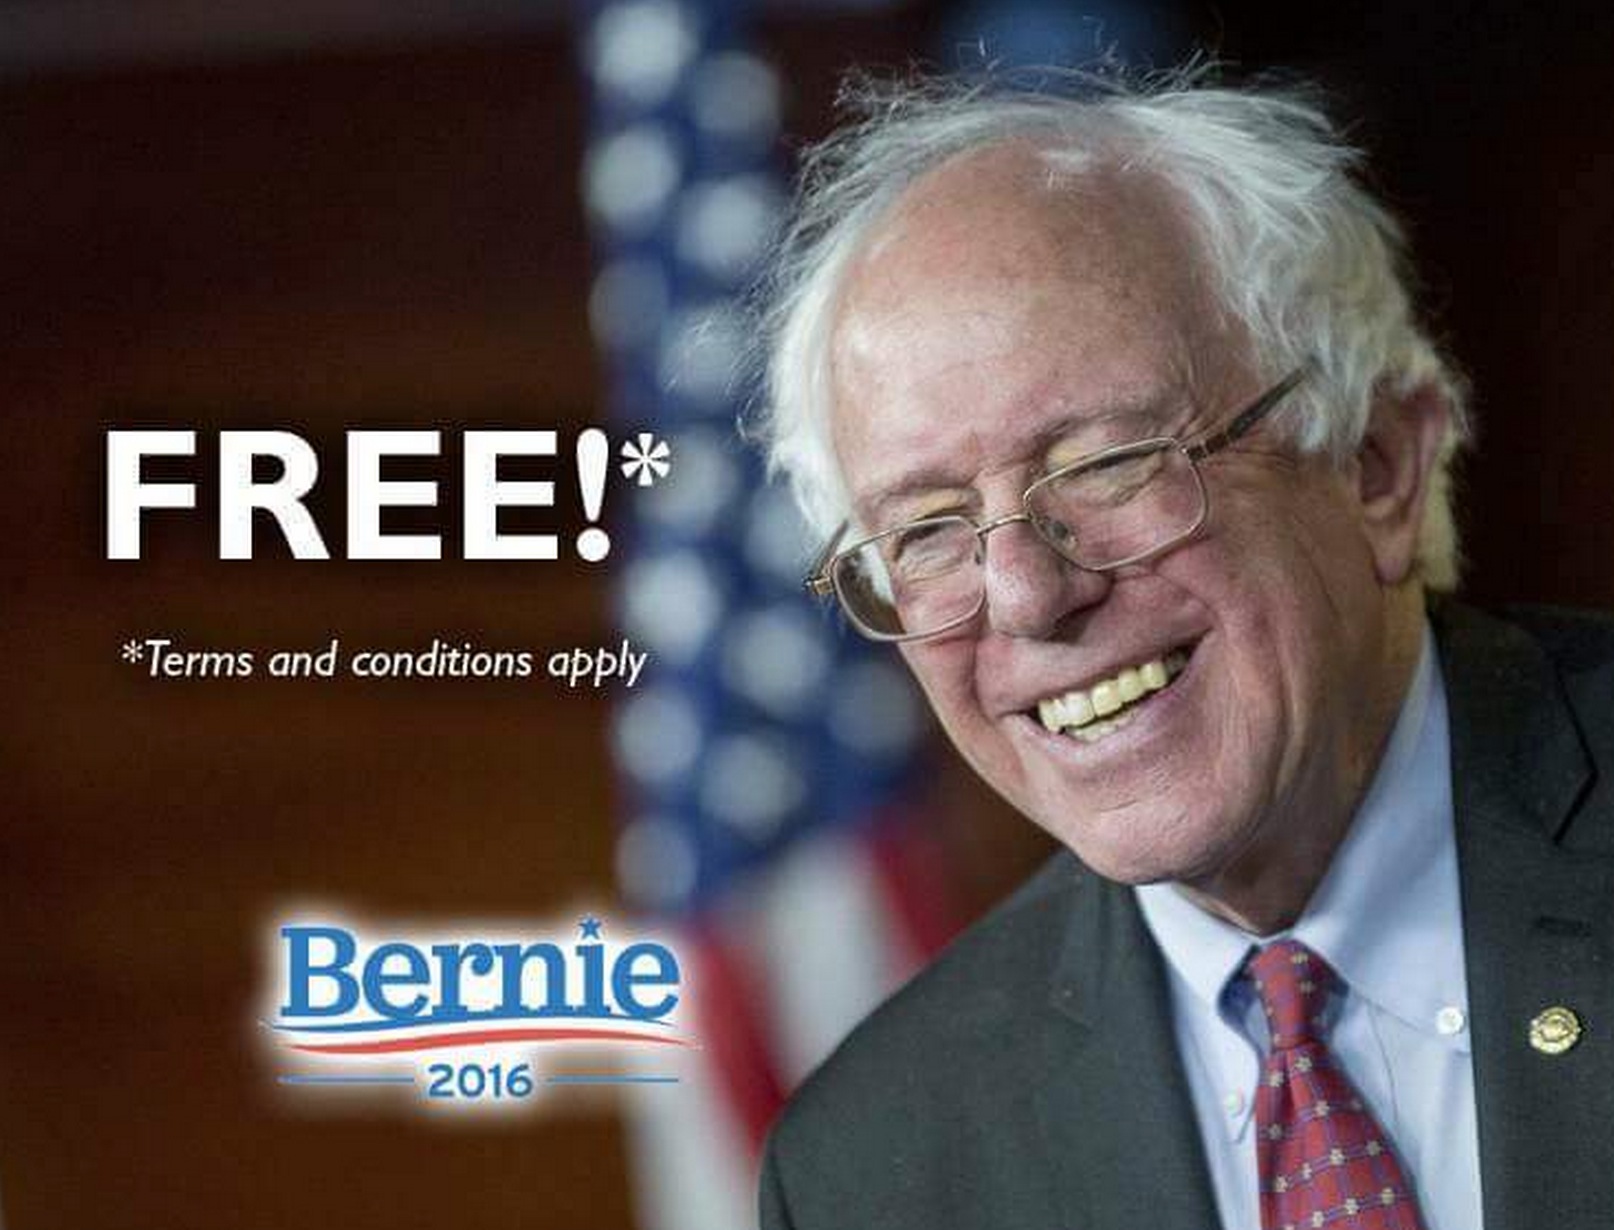 Taxes & Tyranny: Bernie Sanders Leads To the Road to Serfdom [PODCAST]